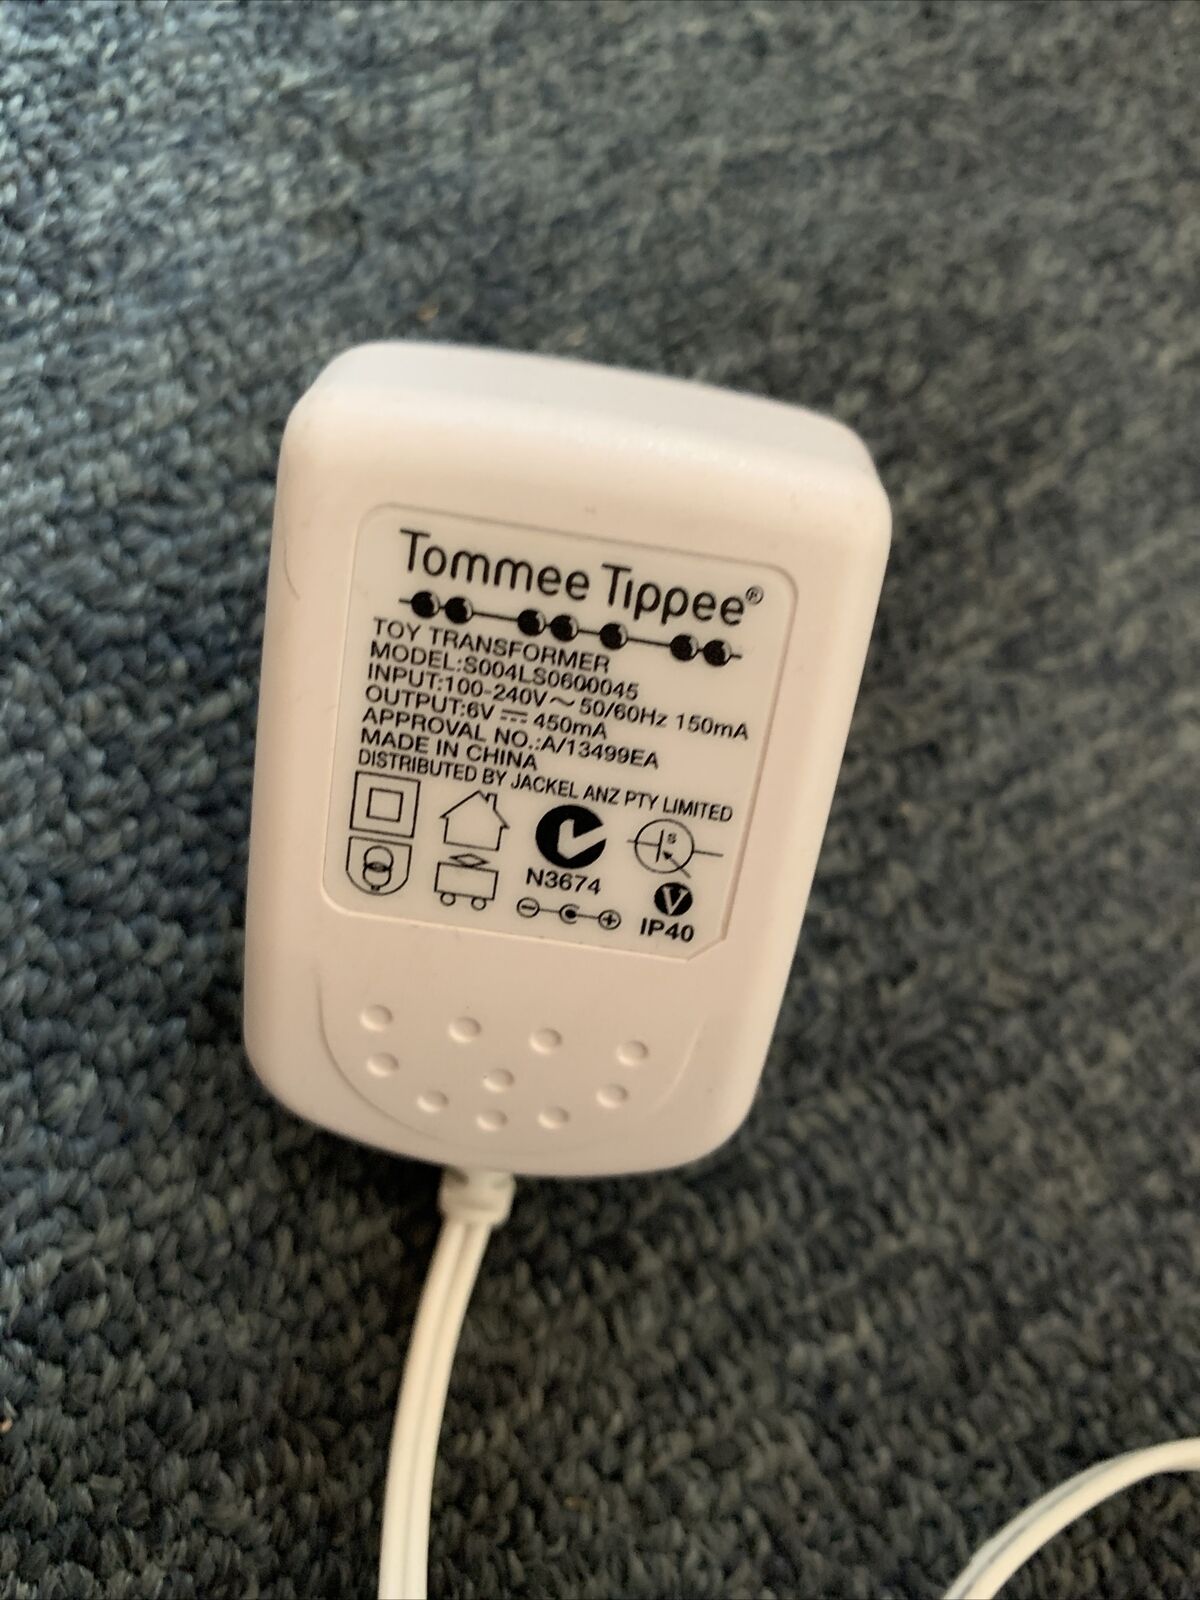 Tommee Tippee Toy Transformer S004LS0600045 AC Adapter 6V 450mA Colour: White Compatible Brand: